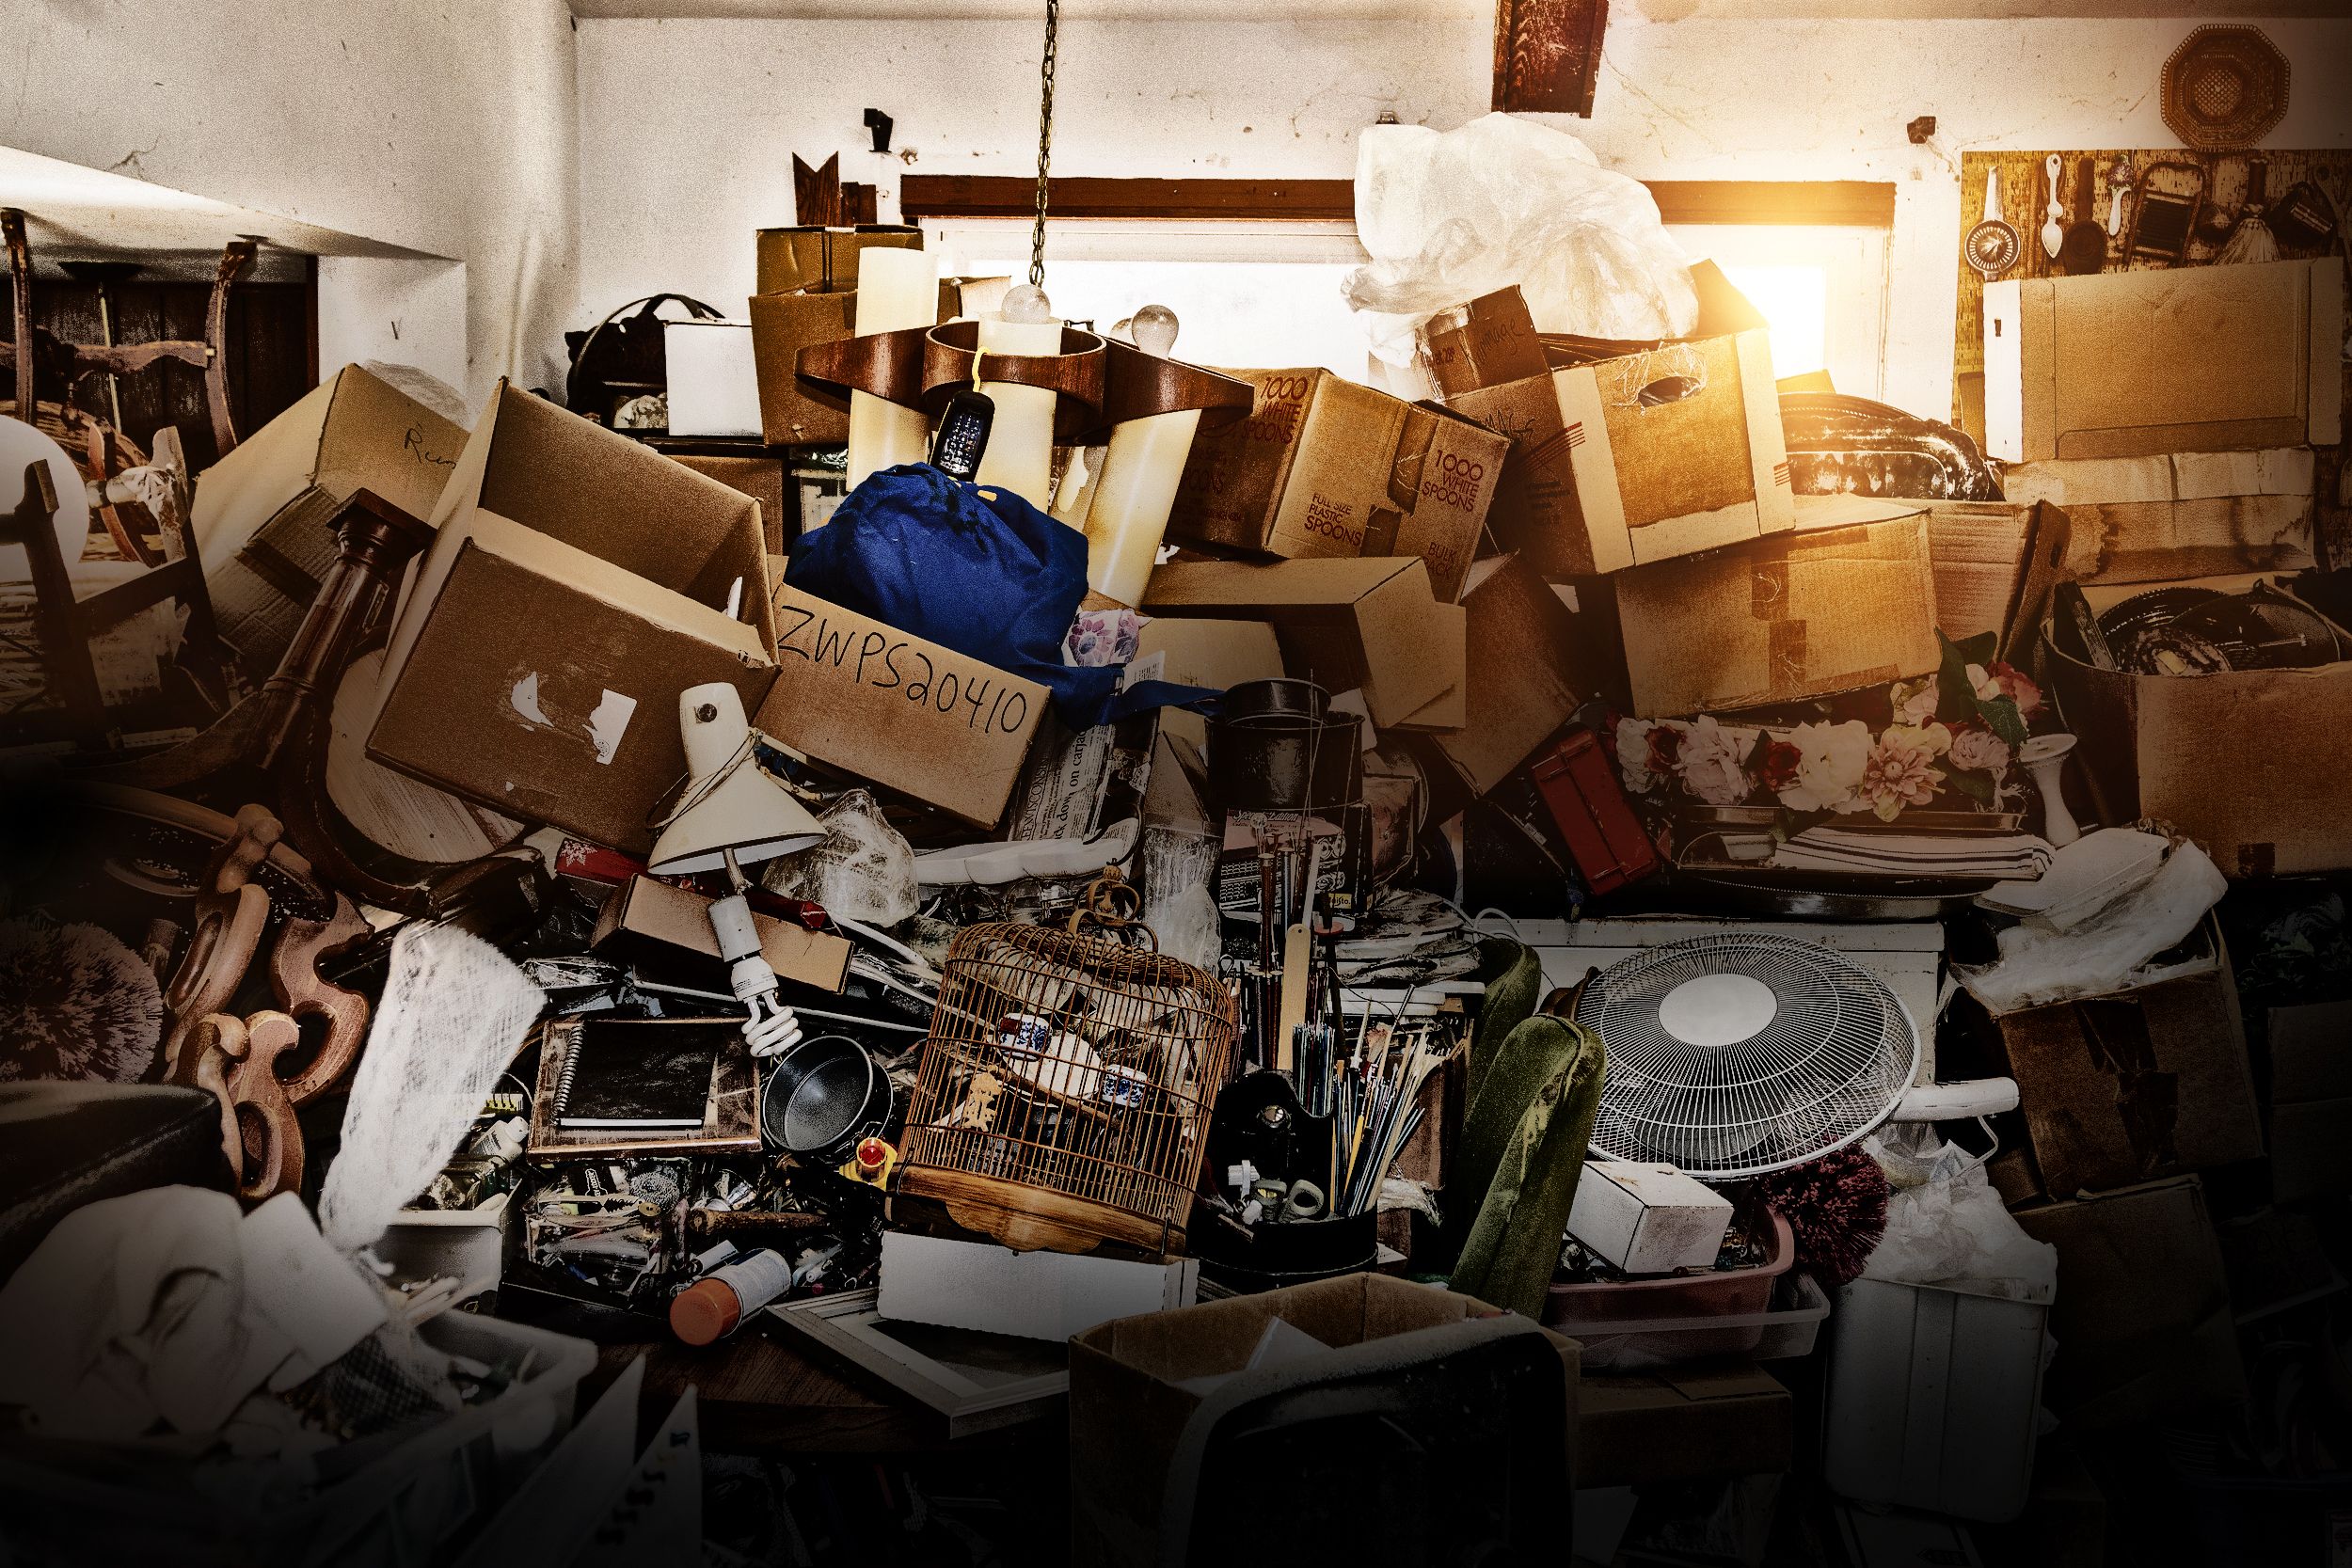 Coming to Canada, Hoarders show to shine a light on hoarding behavior